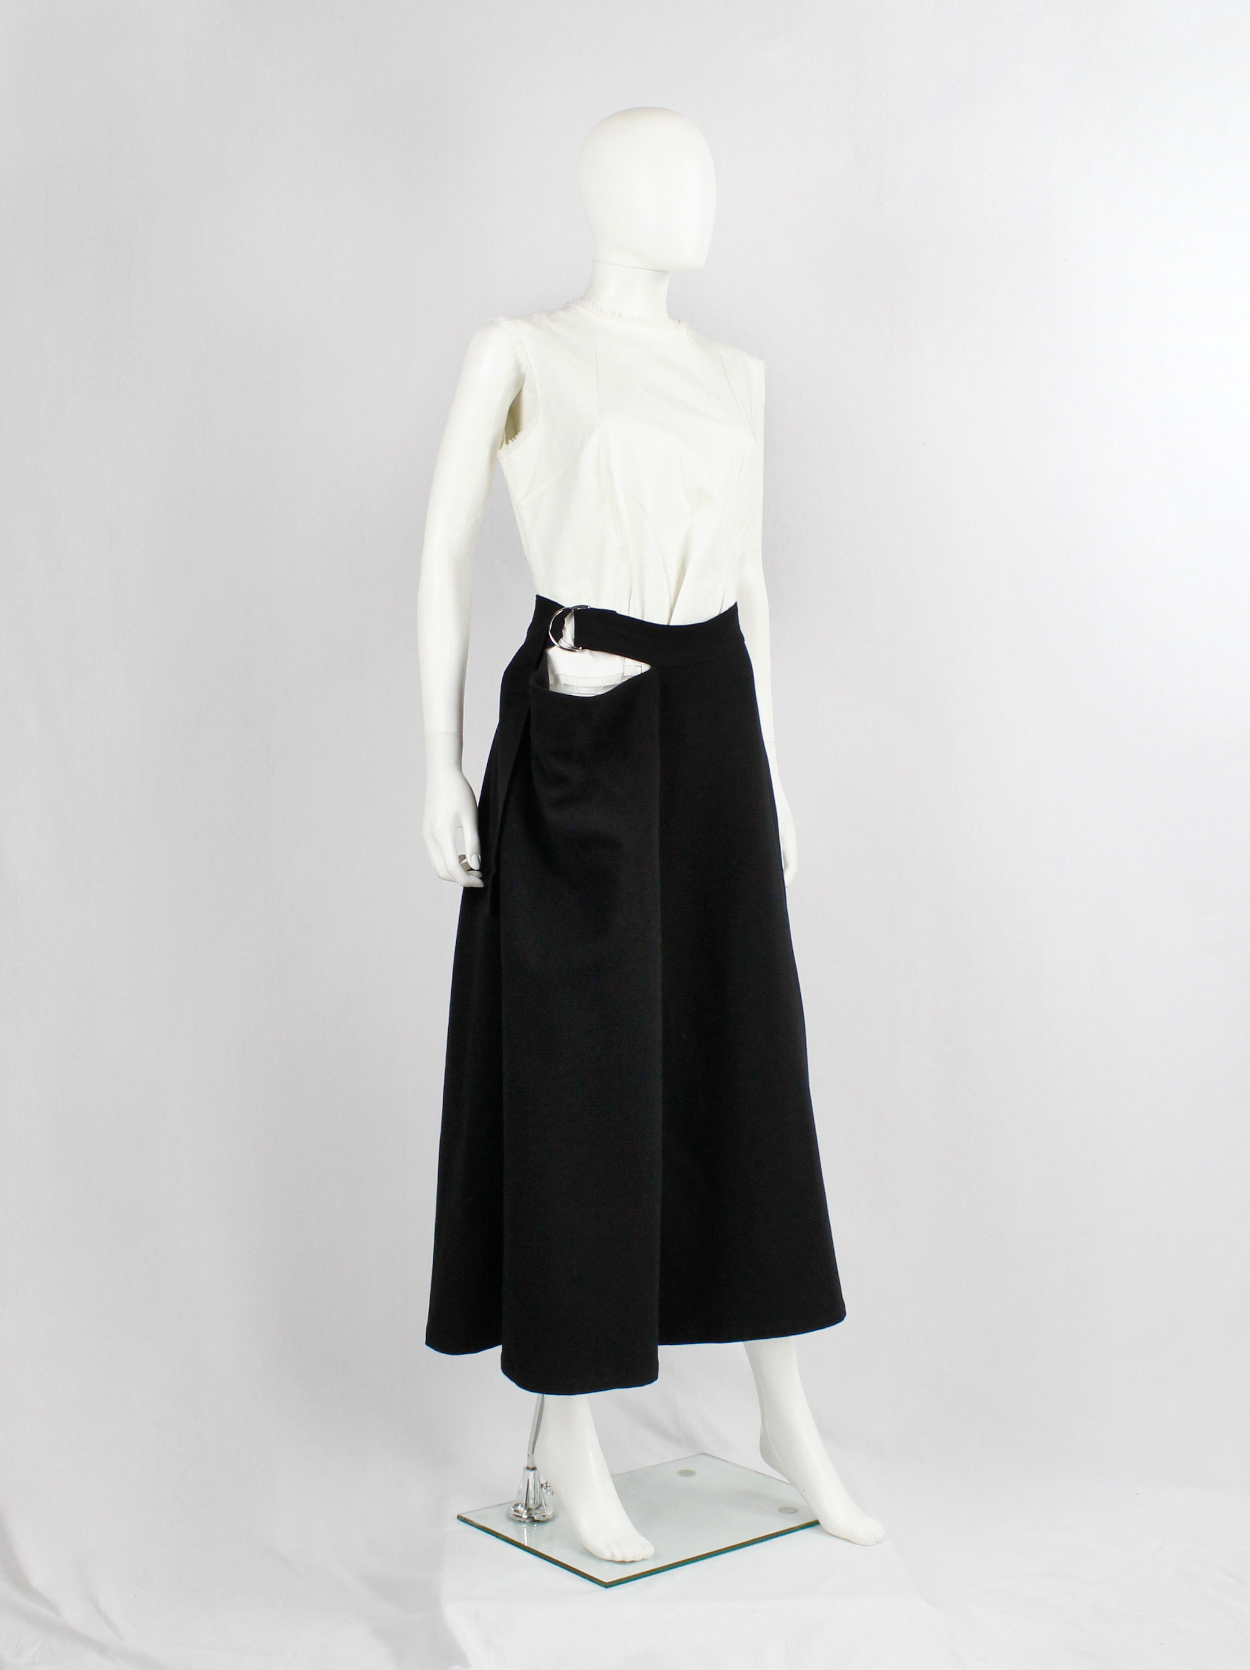 Y's Yohji Yamamoto black cut out skirt with side drape and belt - V A N ...